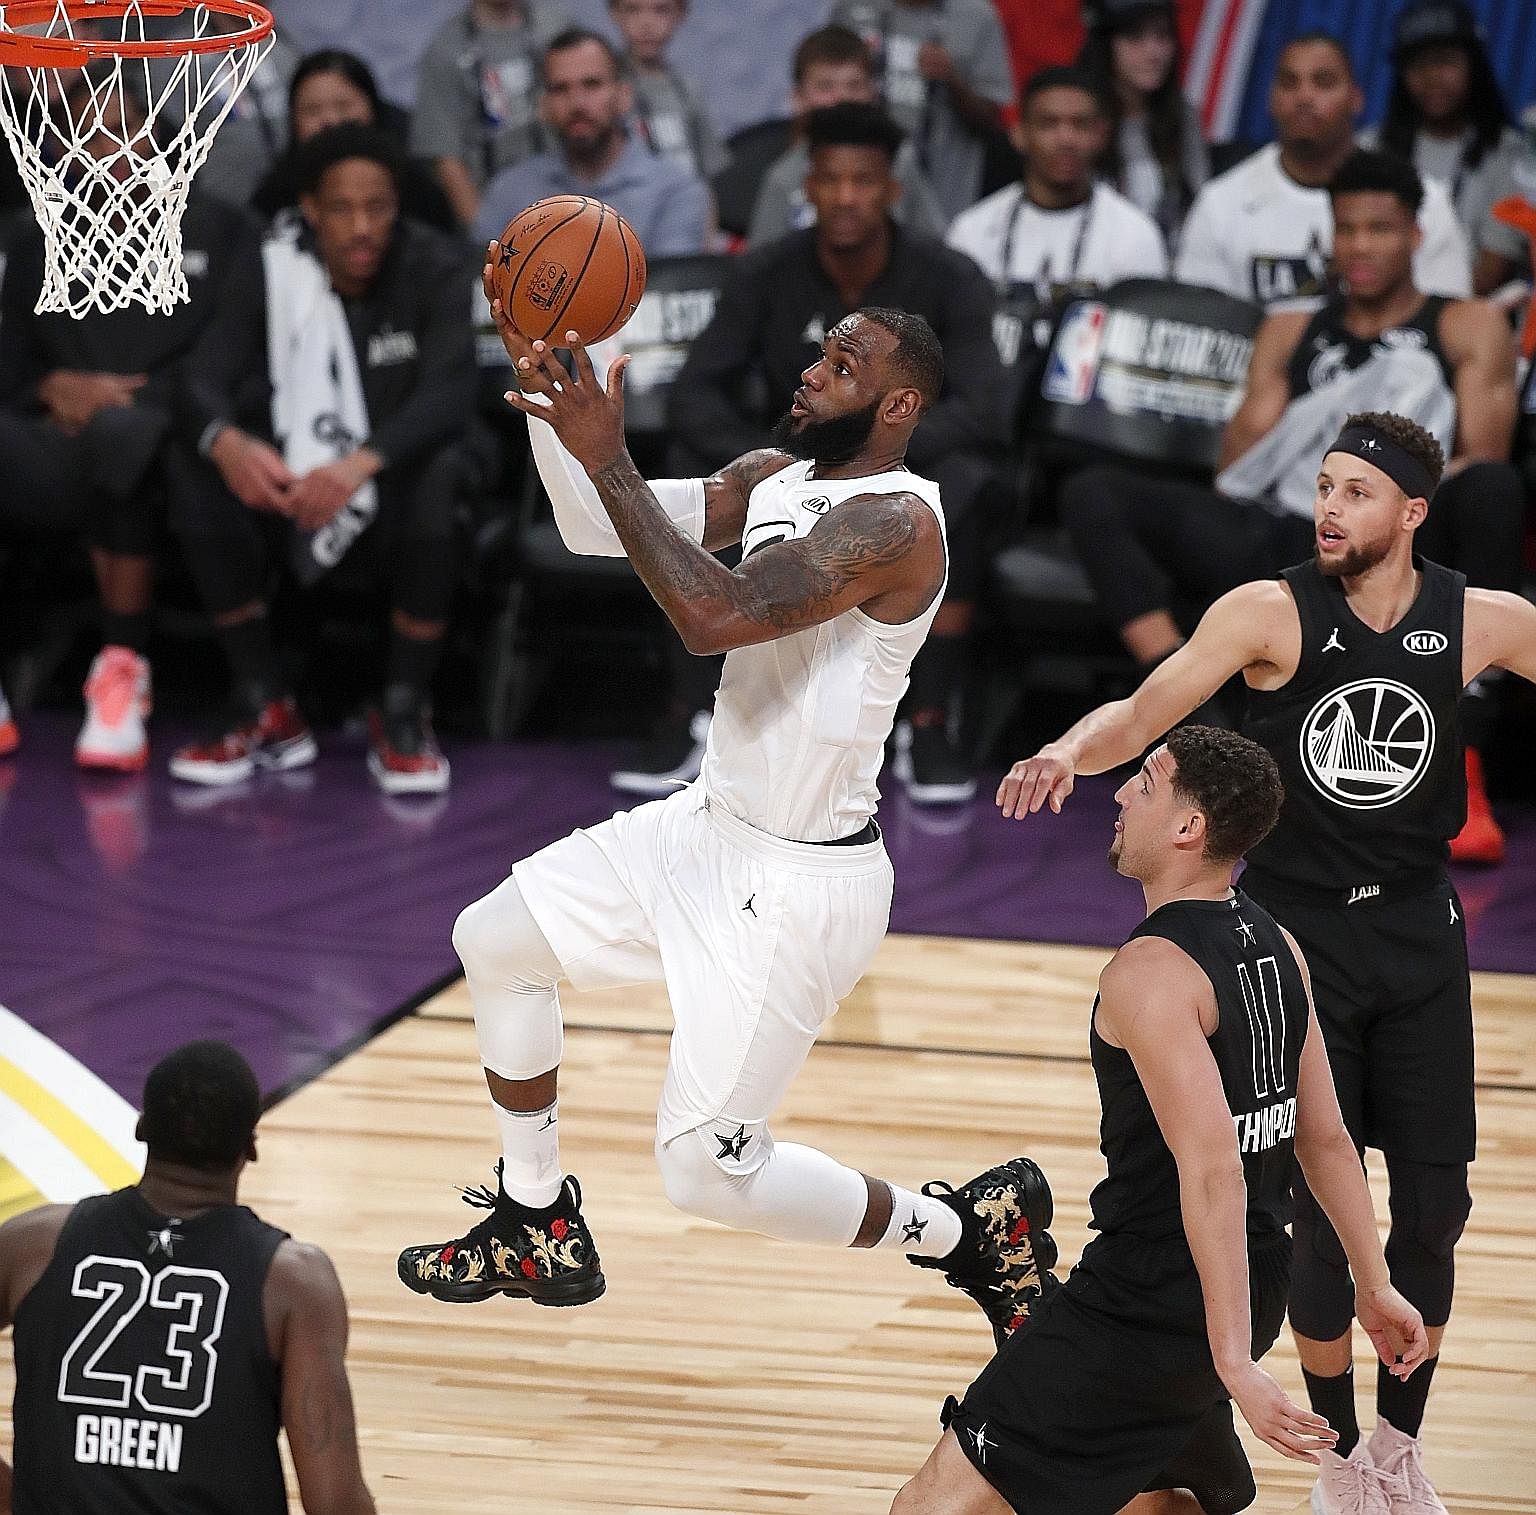 LeBron James going up for a shot after getting past (from left) Draymond Green, Klay Thompson and Stephen Curry in Sunday's All-Star Game.